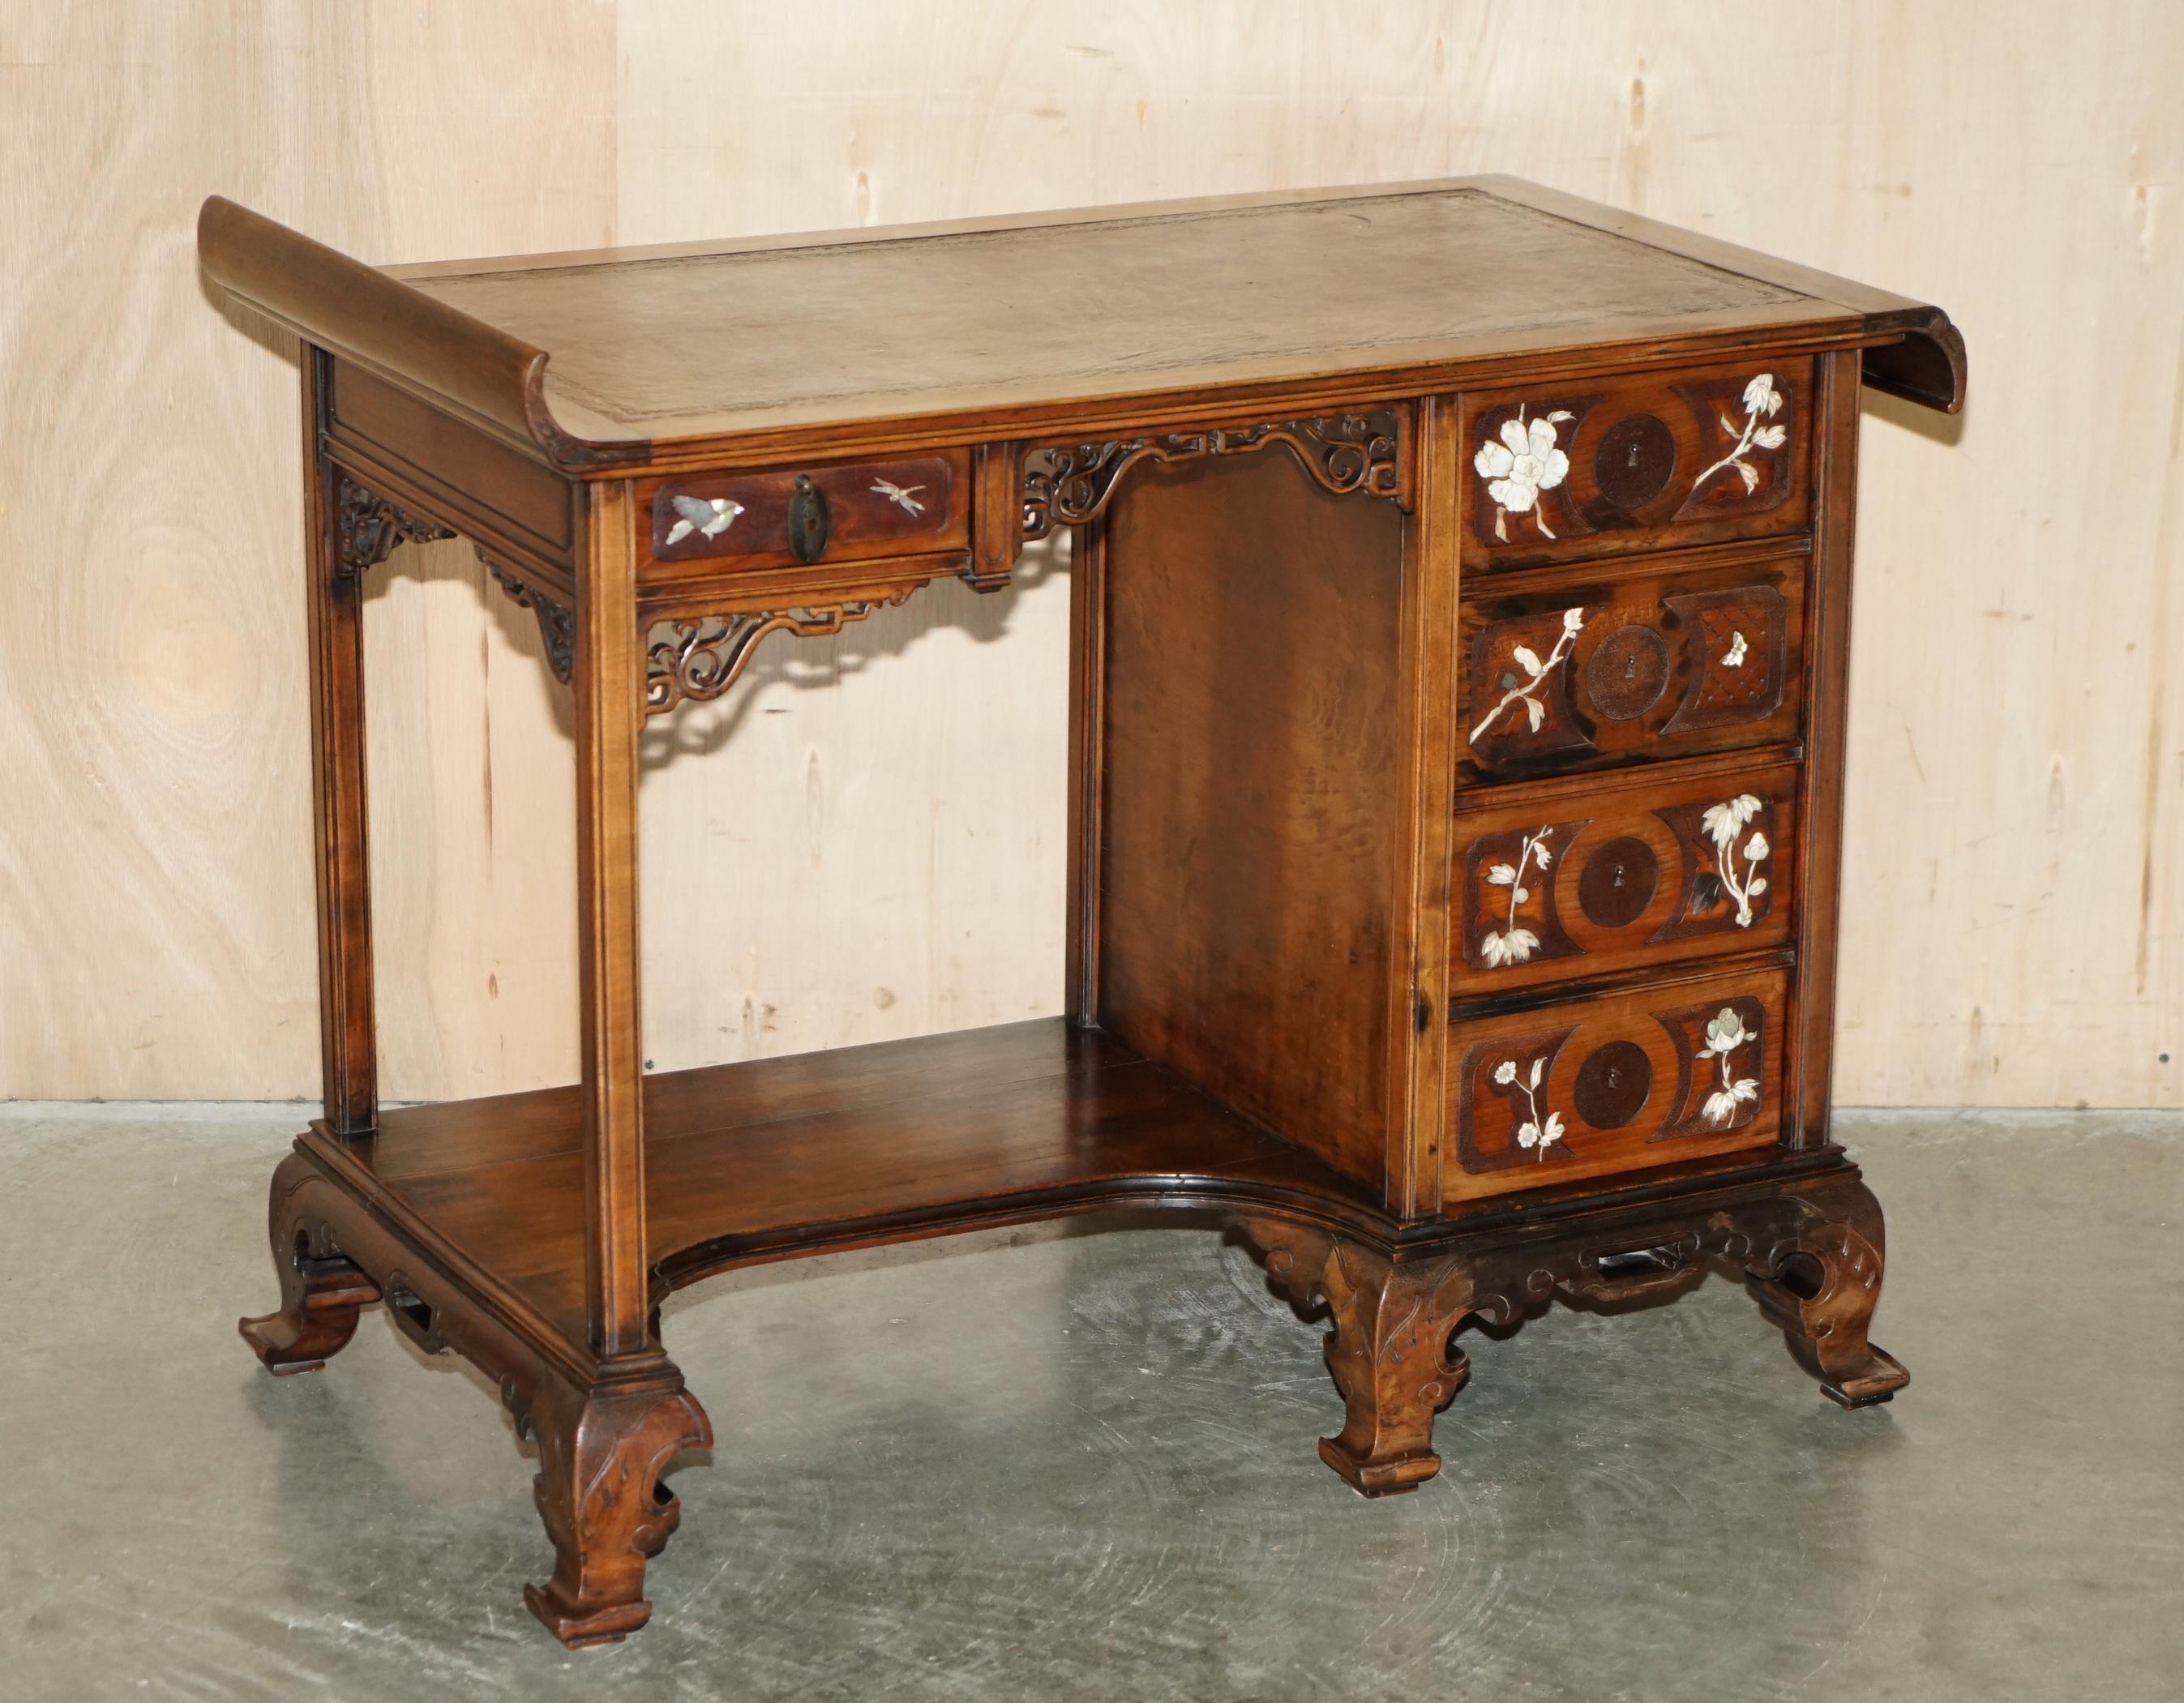 Royal House Antiques

Royal House Antiques is delighted to offer for sale this very rare and important, museum quality Gabriel Viardot 1830-1906 attributed writing desk with sublime mother of pearl inlay 

Please note the delivery fee listed is just